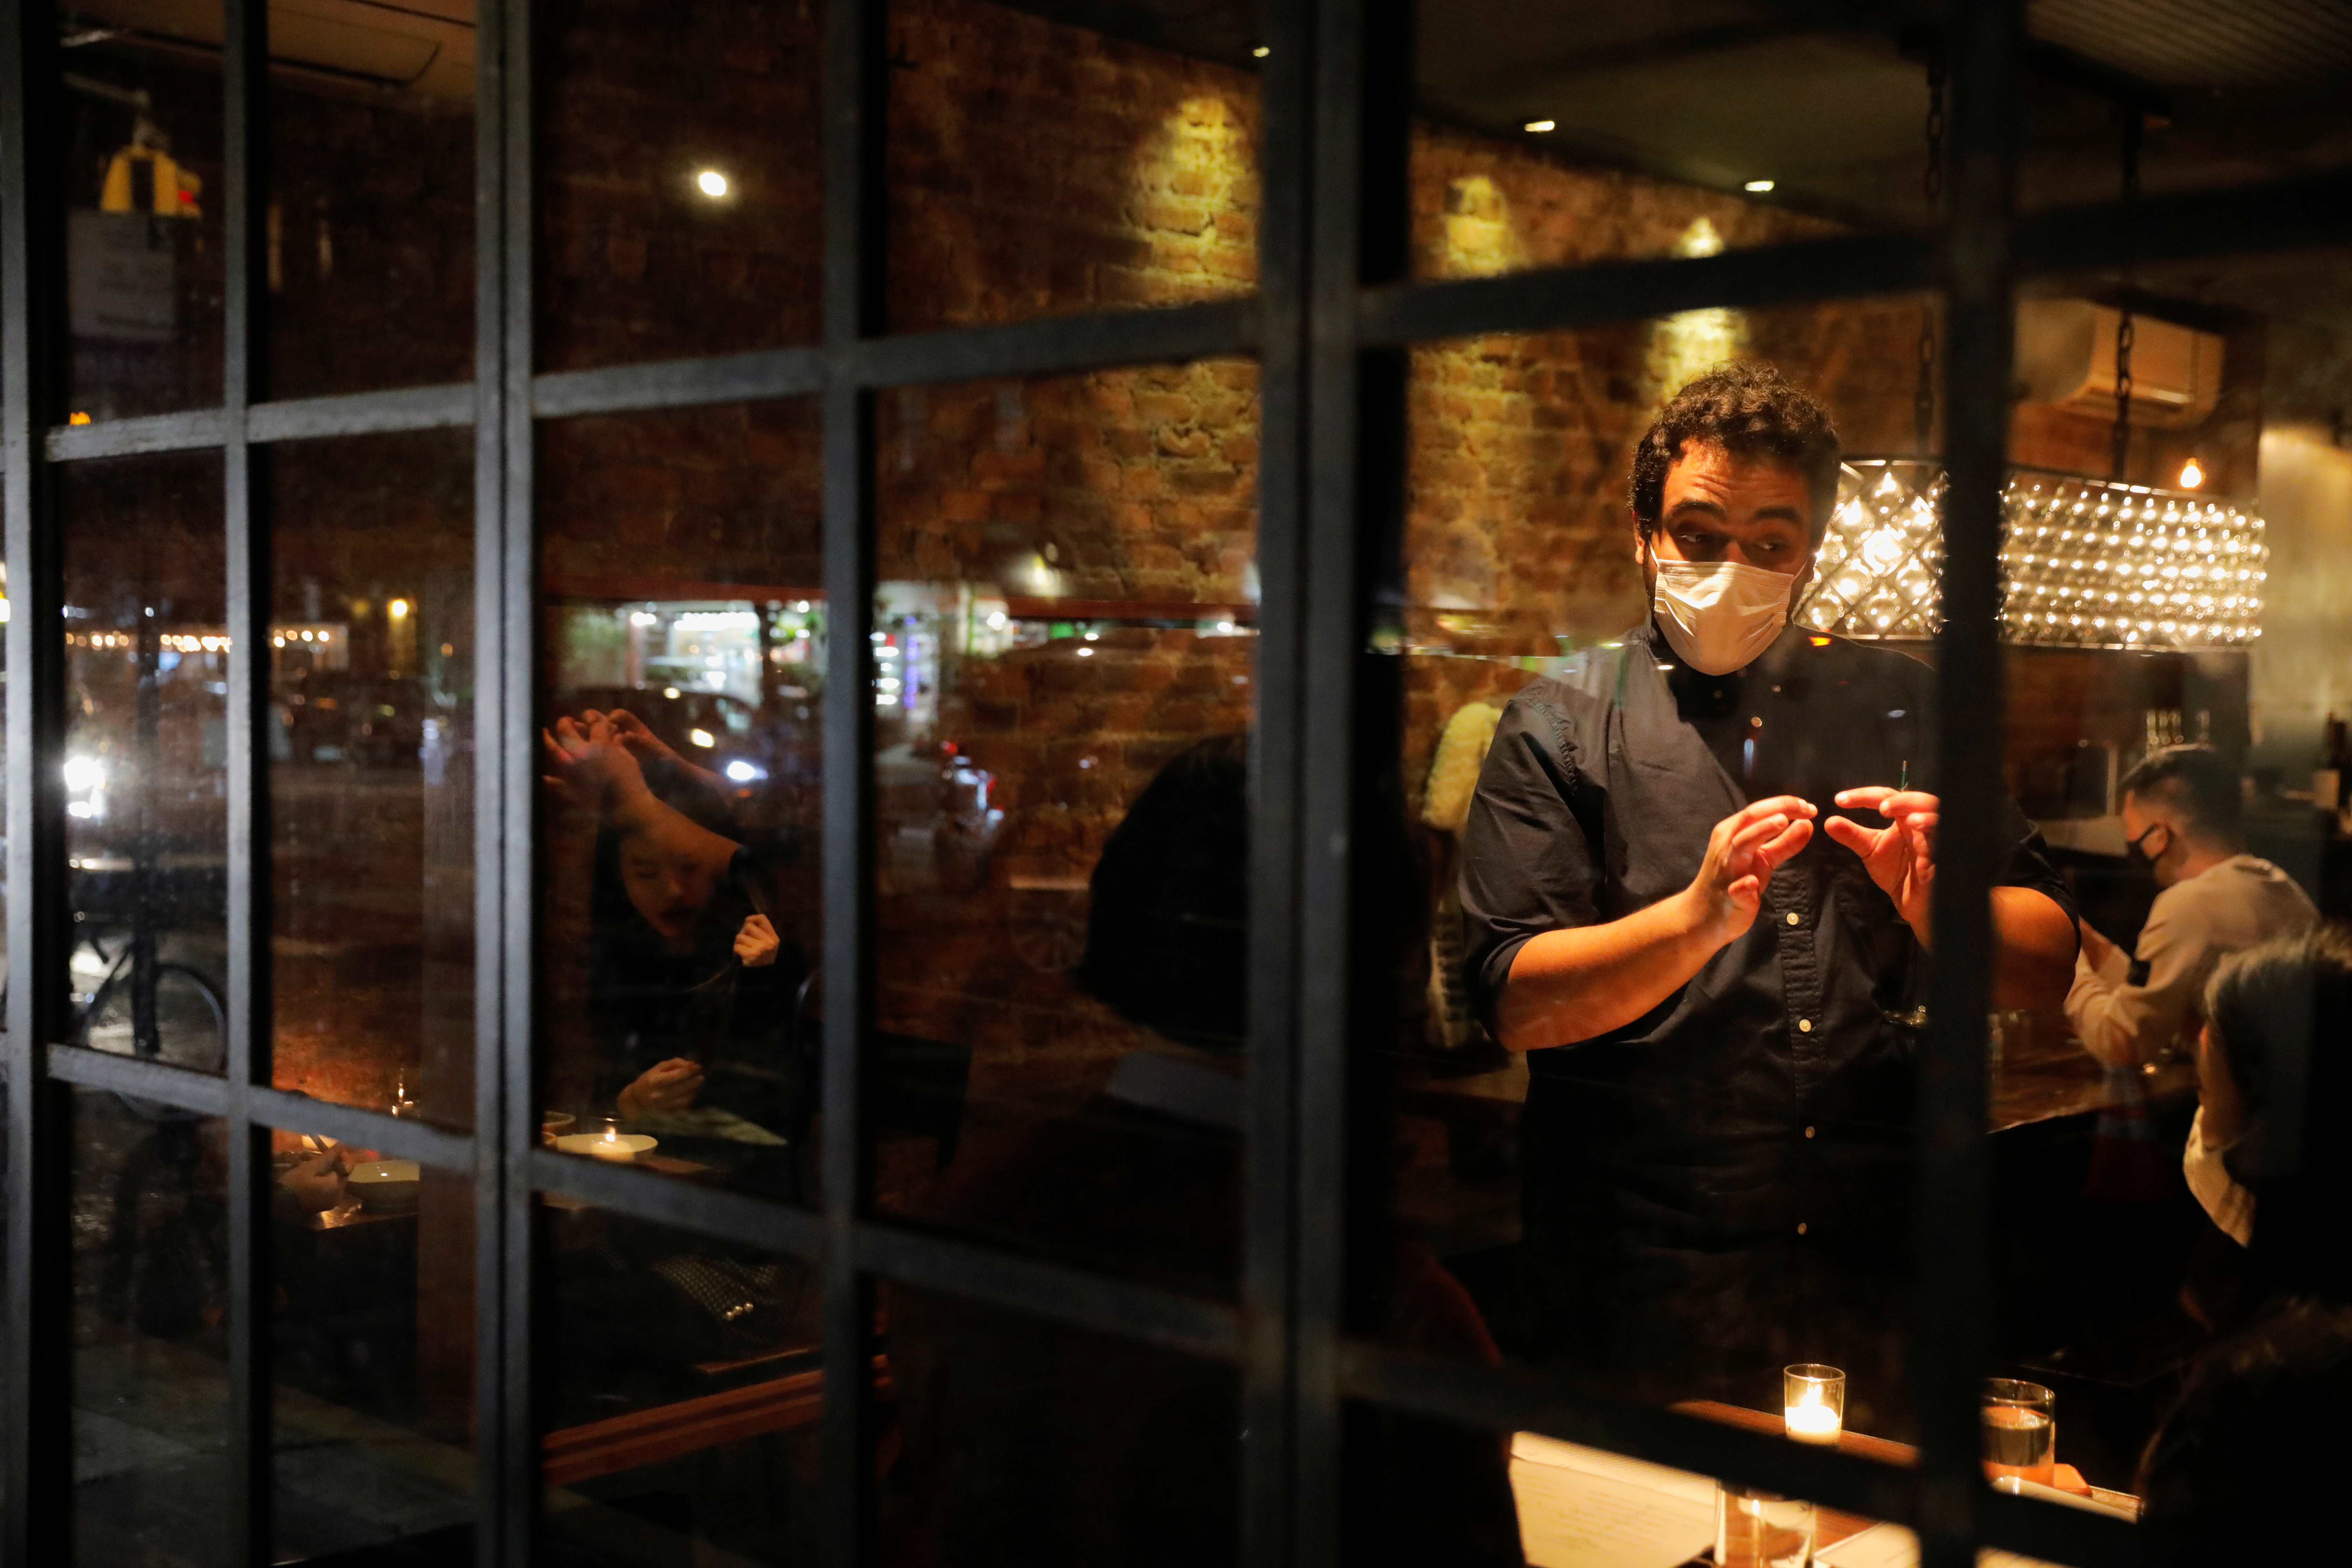 A person serves customers at Oiji, a restaurant in the East Village as new restrictions were announced on bars and restaurants for 10 PM closure, to help fight the spread of the coronavirus disease (COVID-19), in Manhattan, New York City November 13, 2020. REUTERS/Andrew Kelly